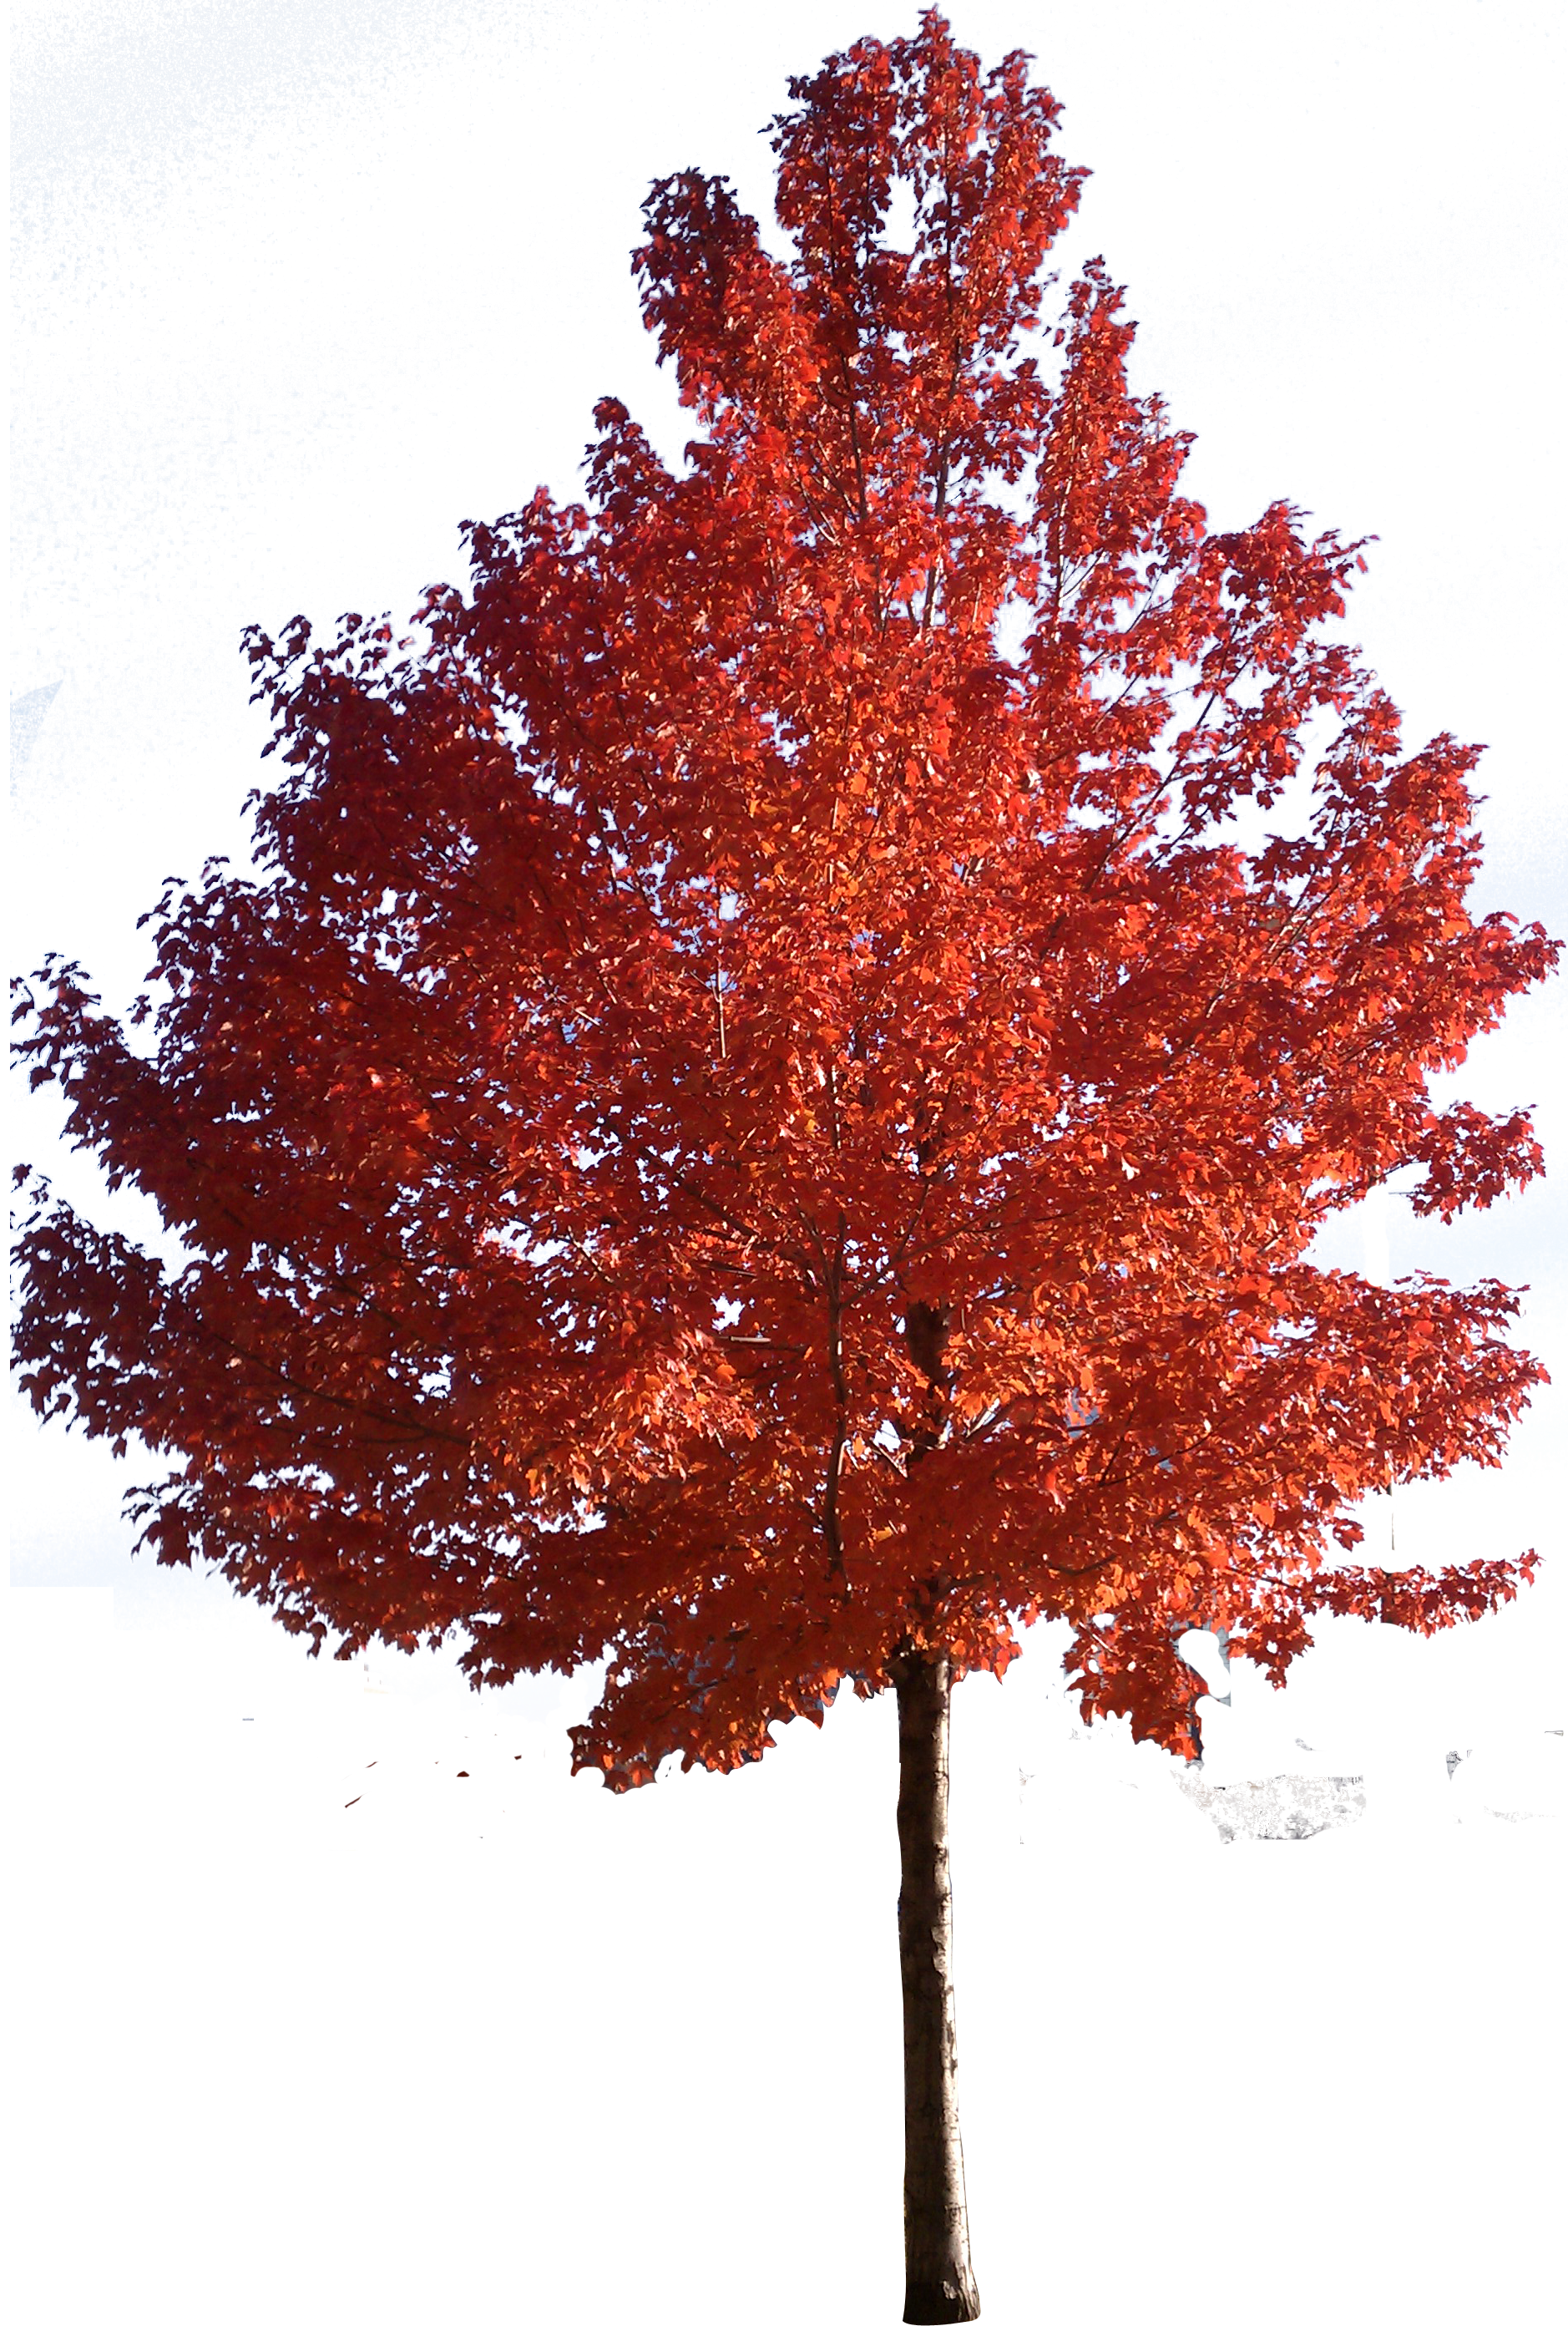 Red Maple Tree Http   Www Photographic Clipart Com Trees2 Html